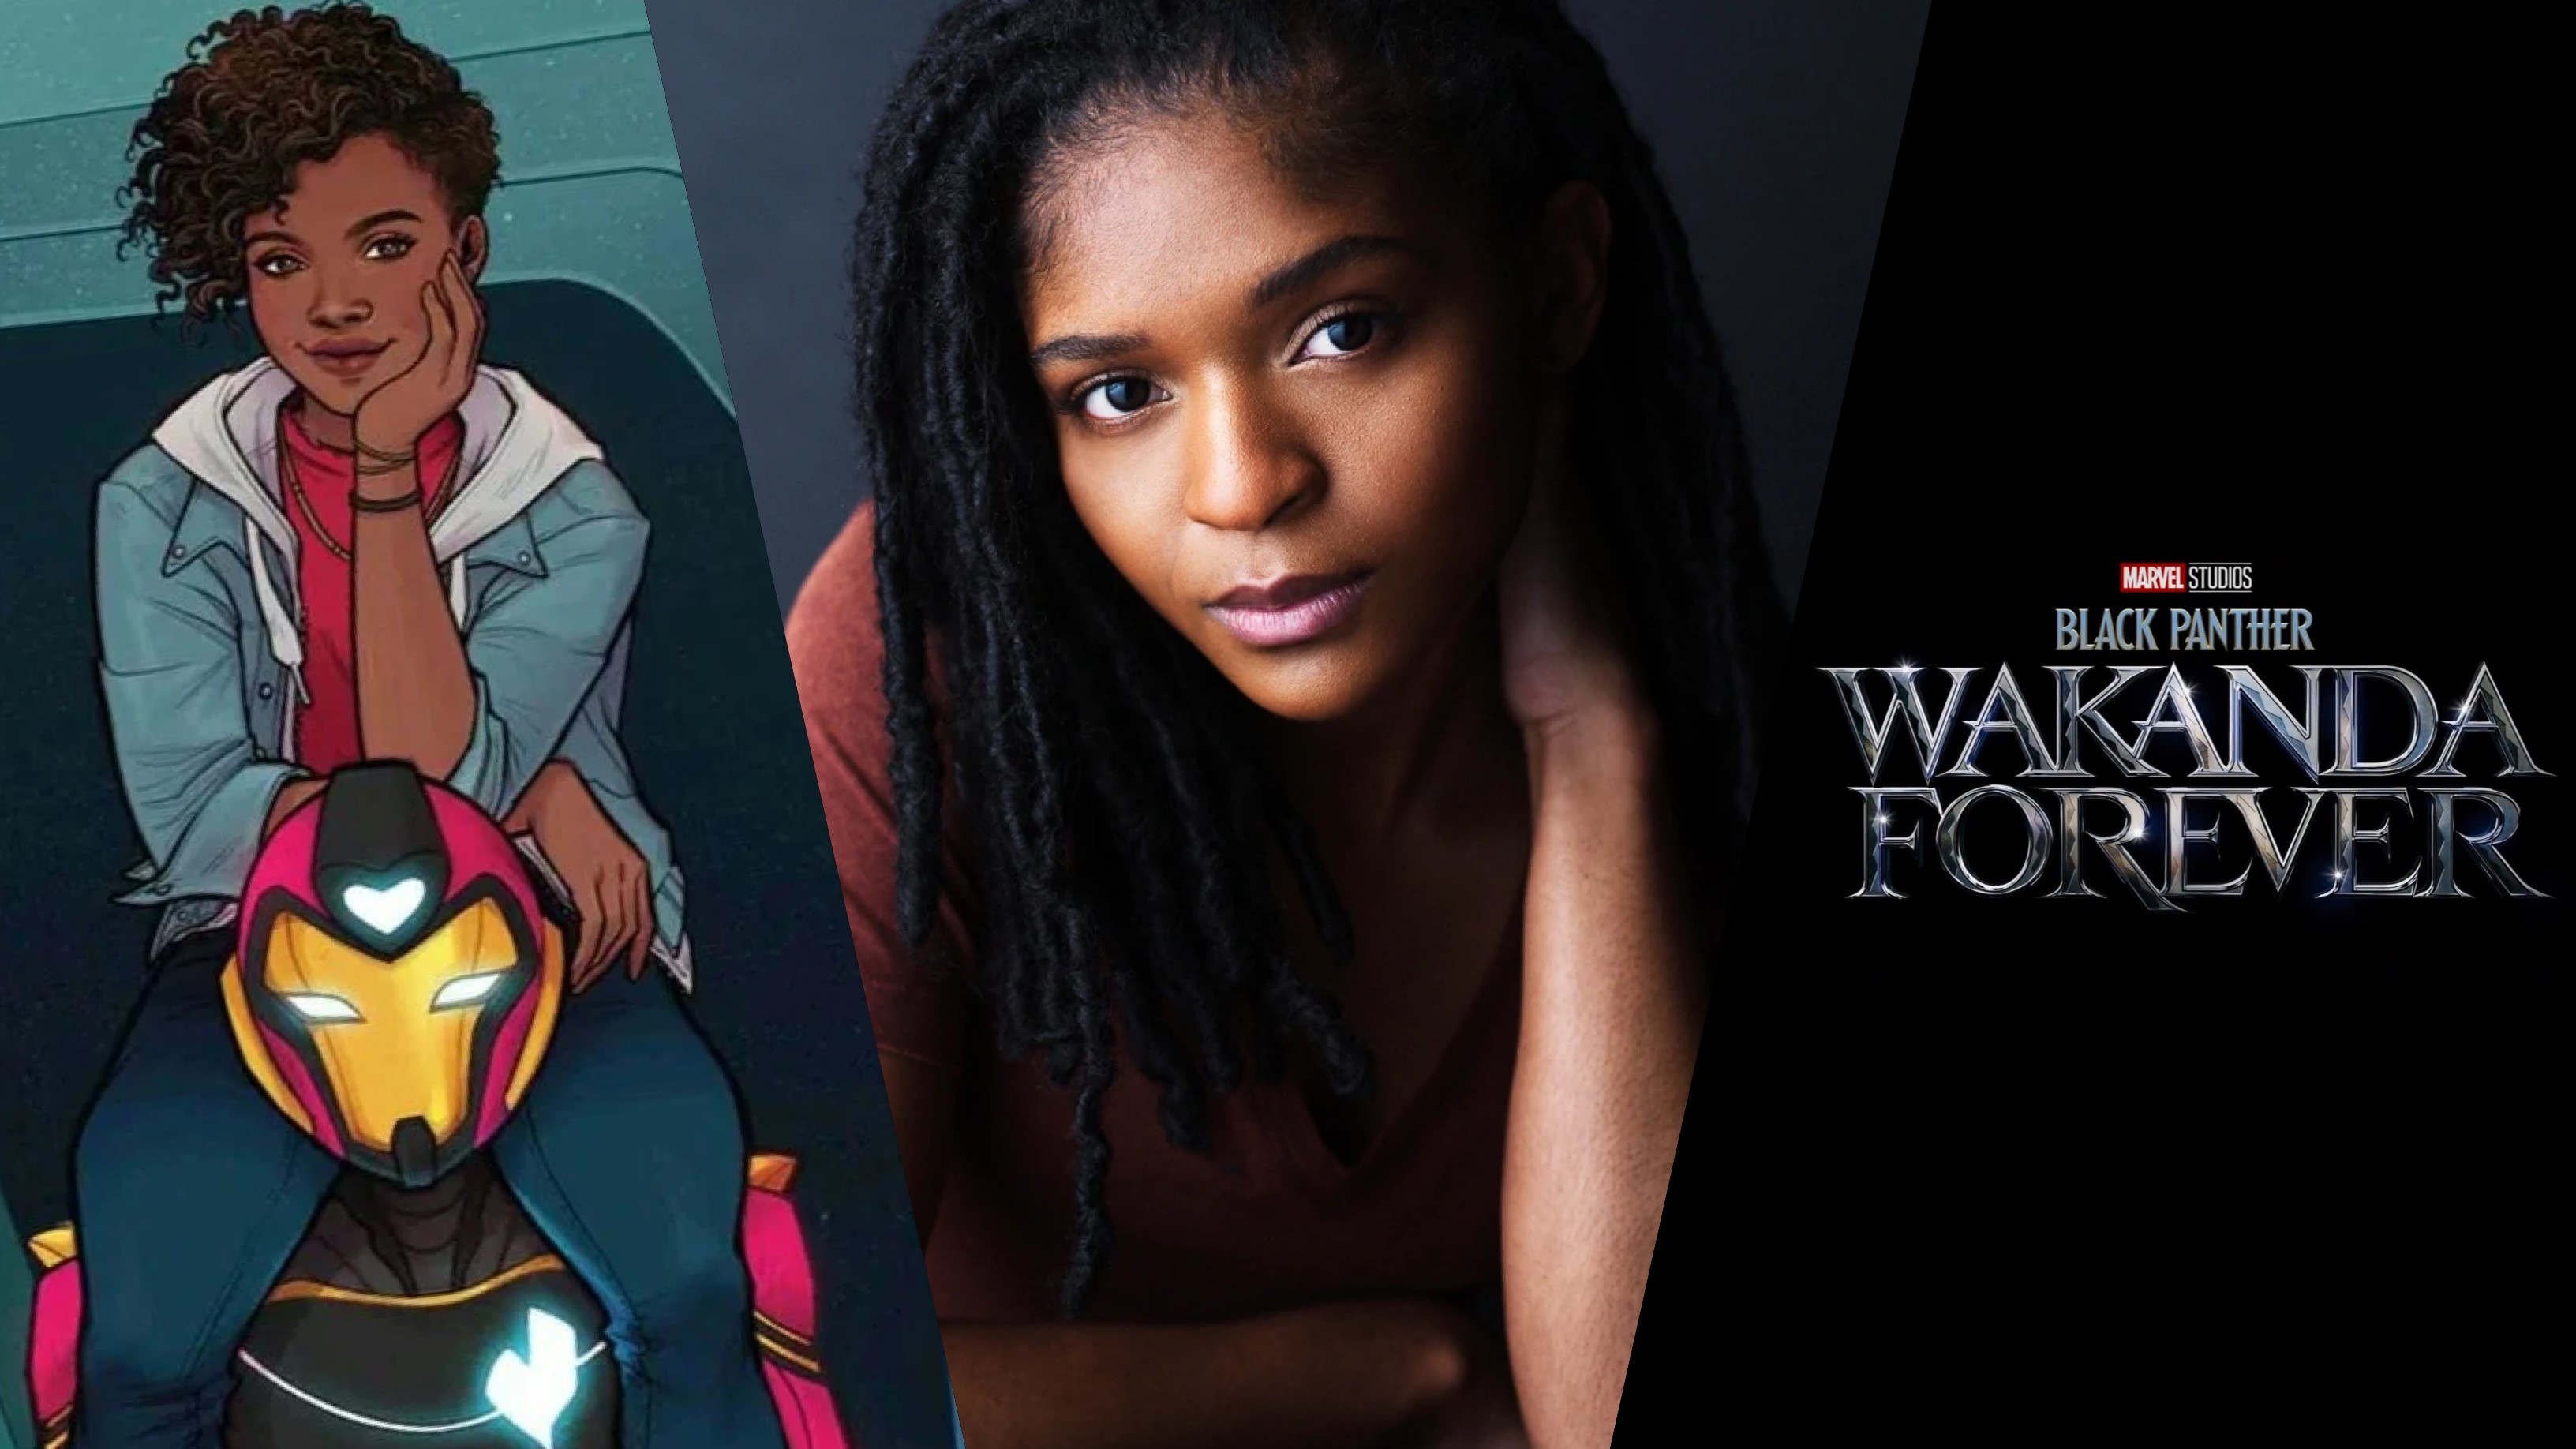 Dominique Thorne Will Make Debut as Ironheart in ‘Black Panther: Wakanda Forever’